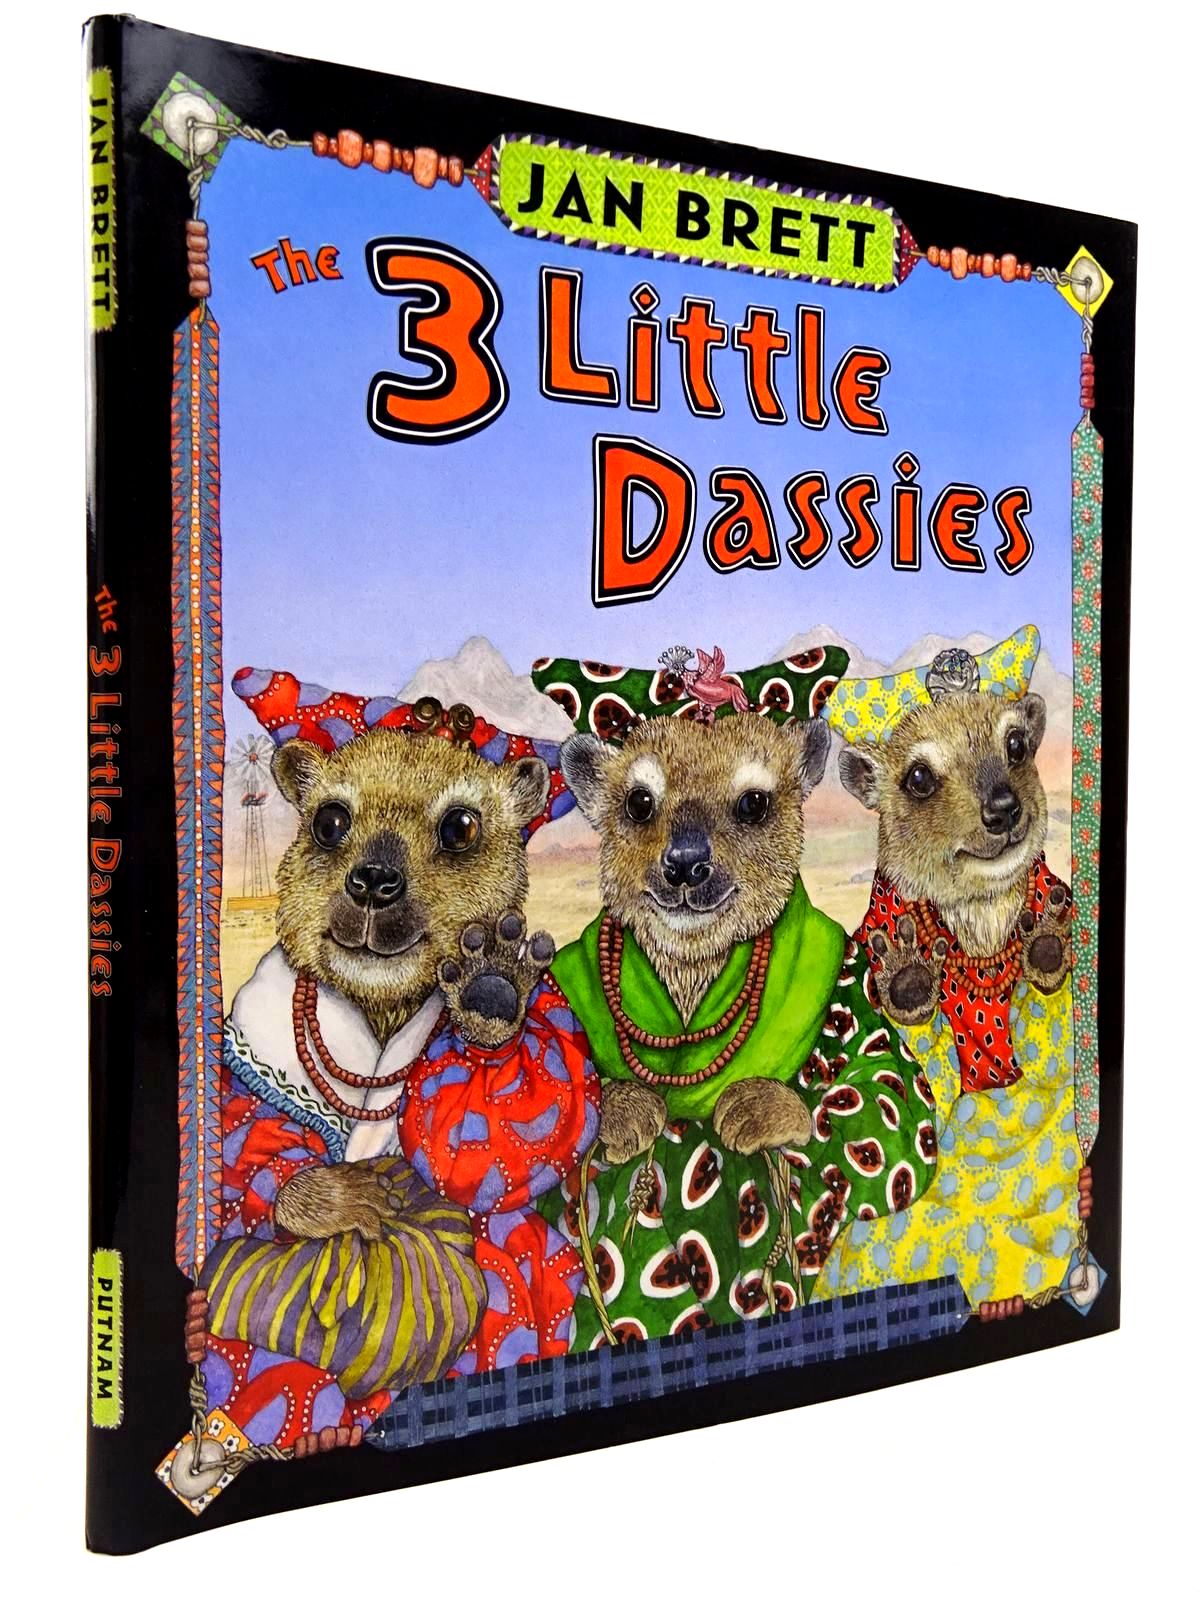 Photo of THE 3 LITTLE DASSIES written by Brett, Jan illustrated by Brett, Jan published by G.P. Putnam's Sons (STOCK CODE: 2130995)  for sale by Stella & Rose's Books